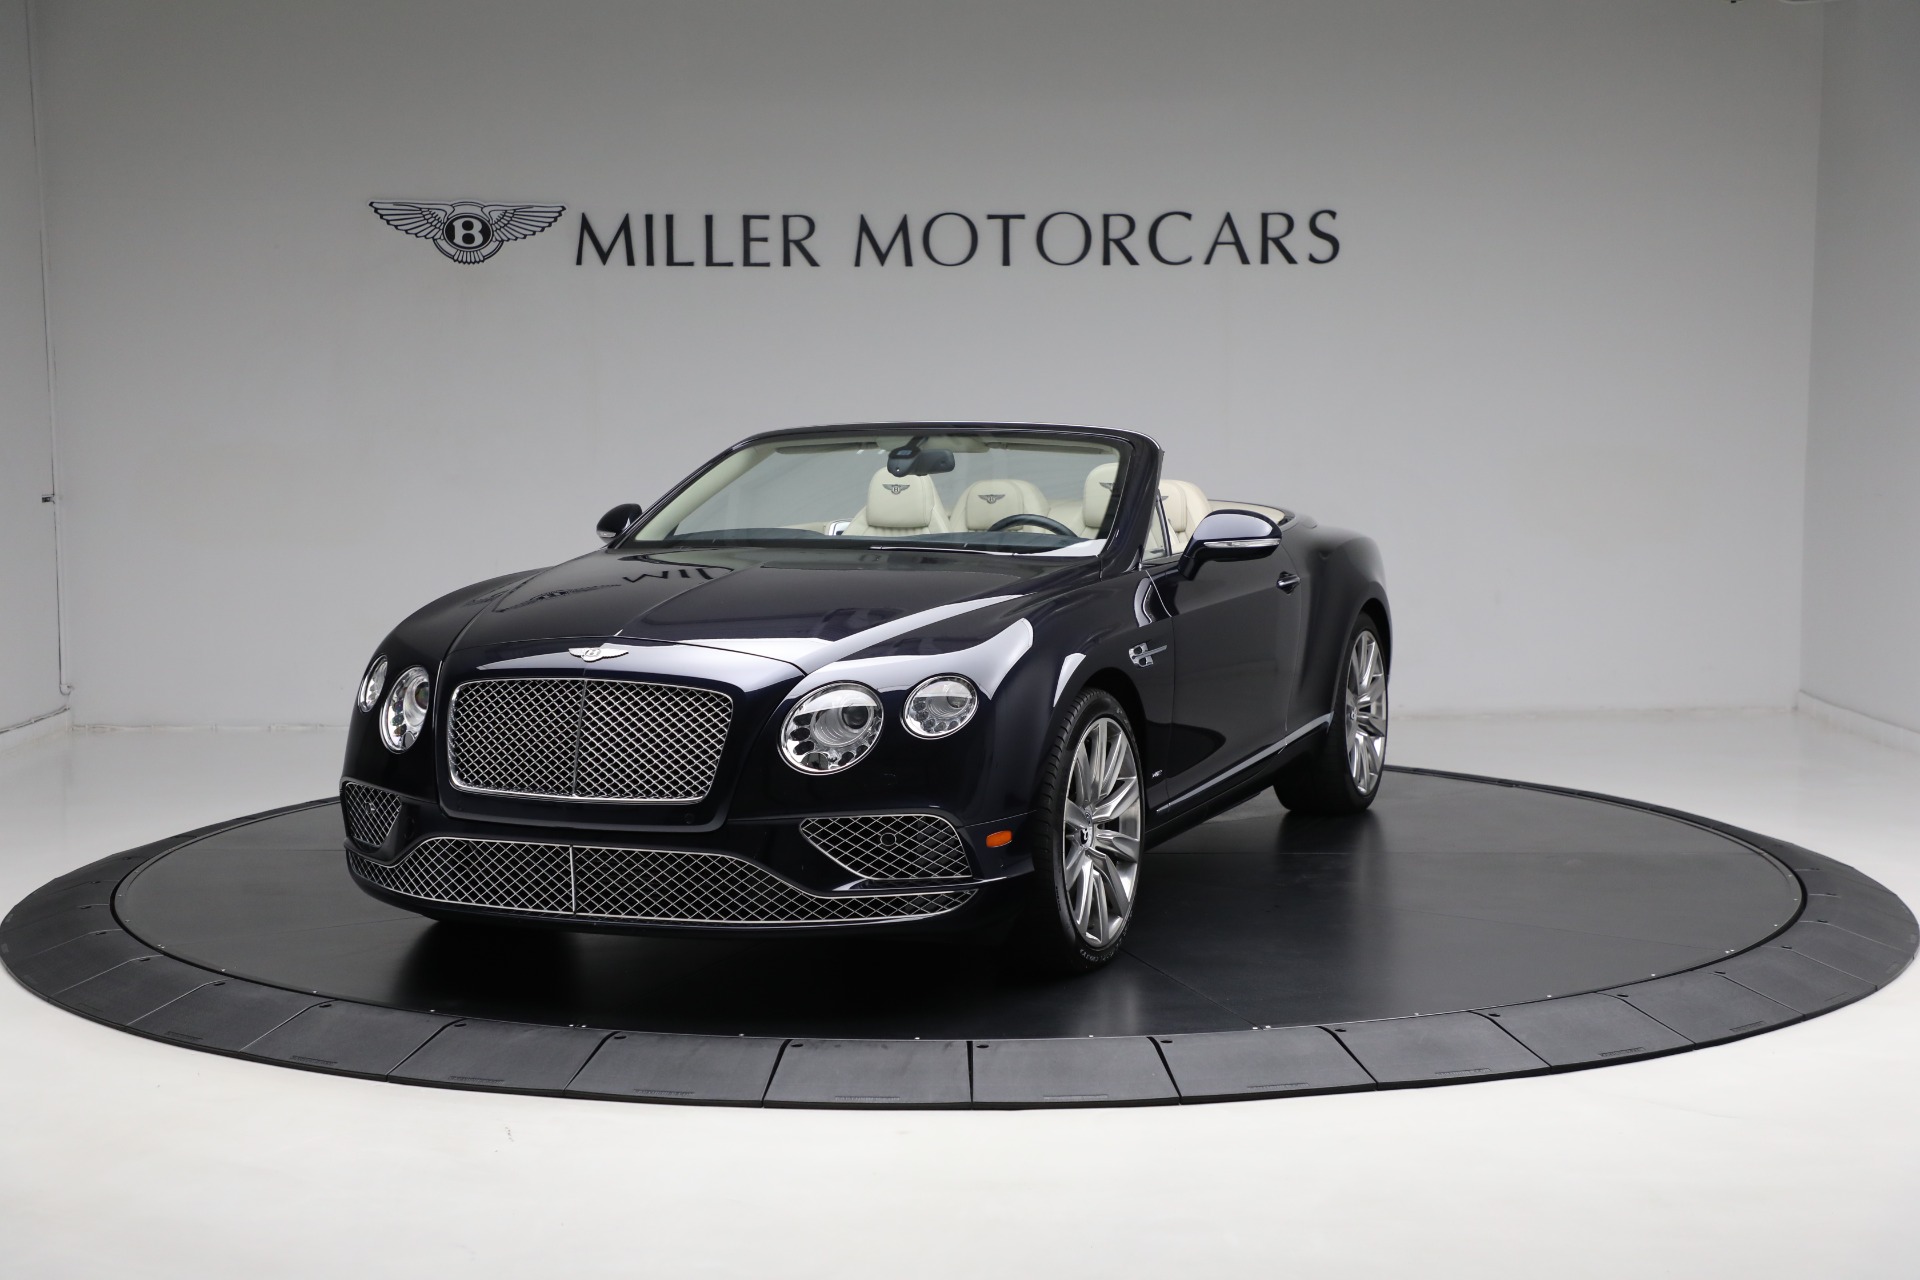 Used 2018 Bentley Continental GT for sale $159,900 at McLaren Greenwich in Greenwich CT 06830 1